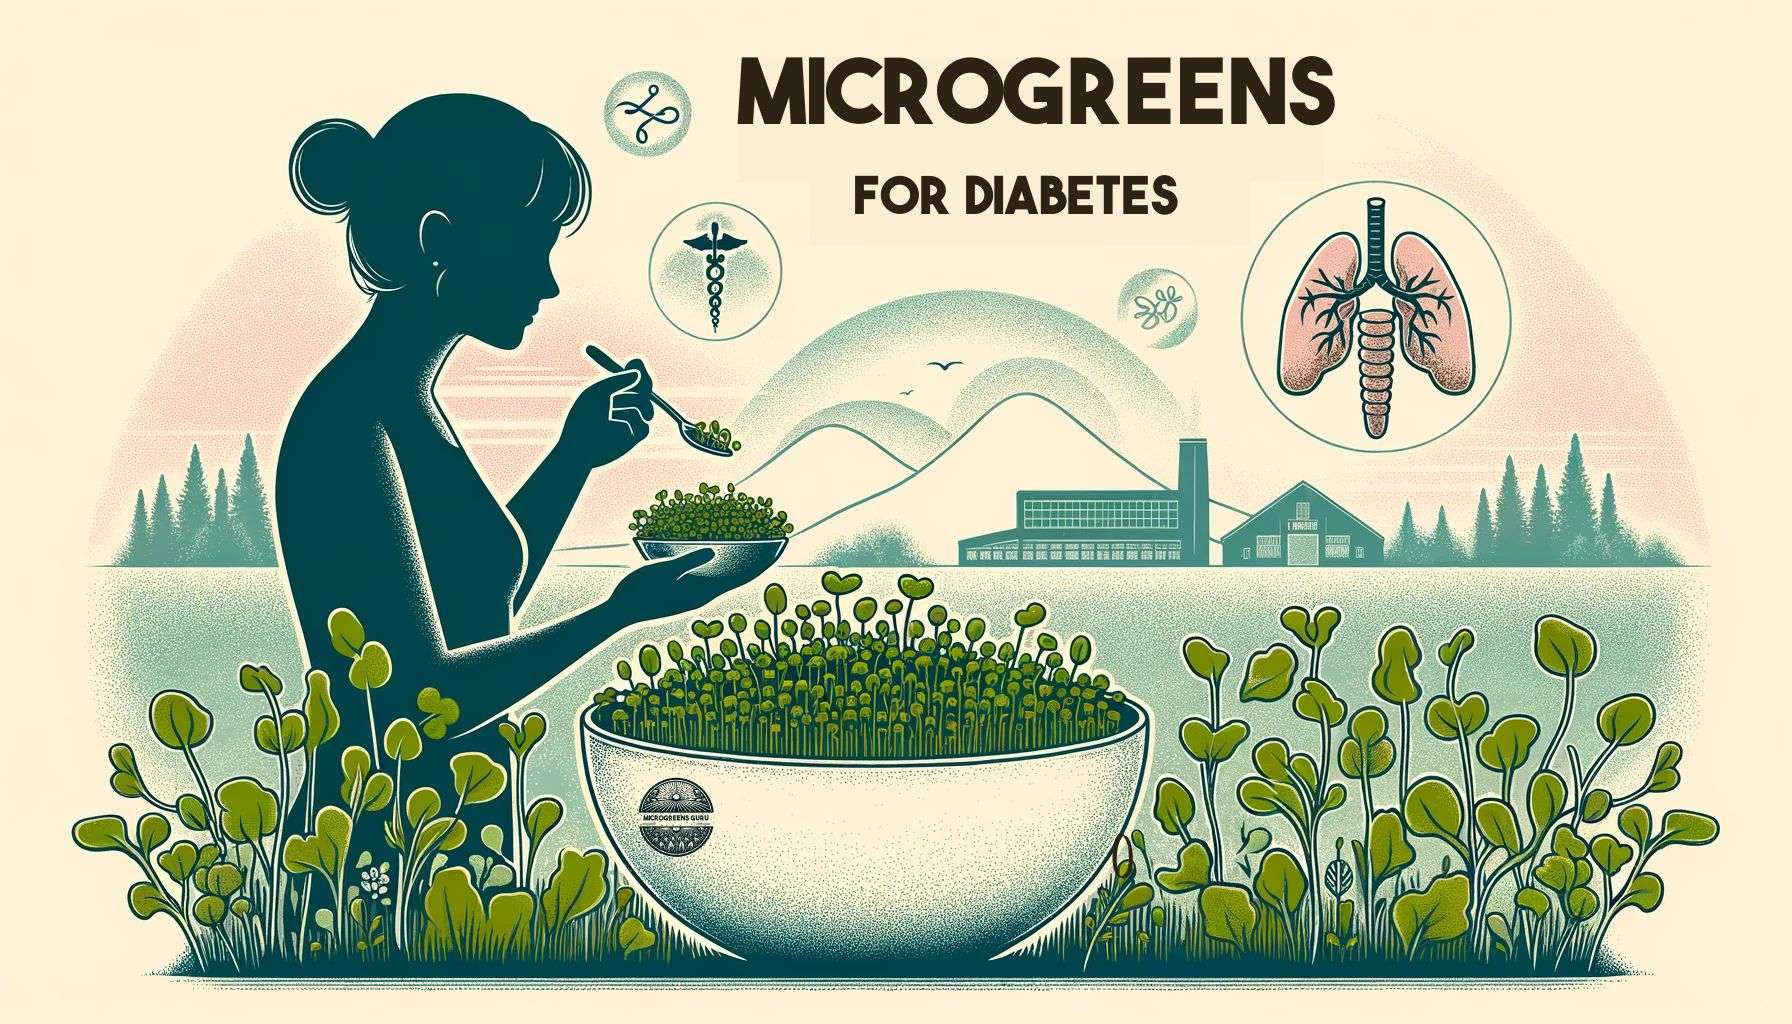 Benefits Of Adding Microgreens To Diet For Type 2 Diabetes Management